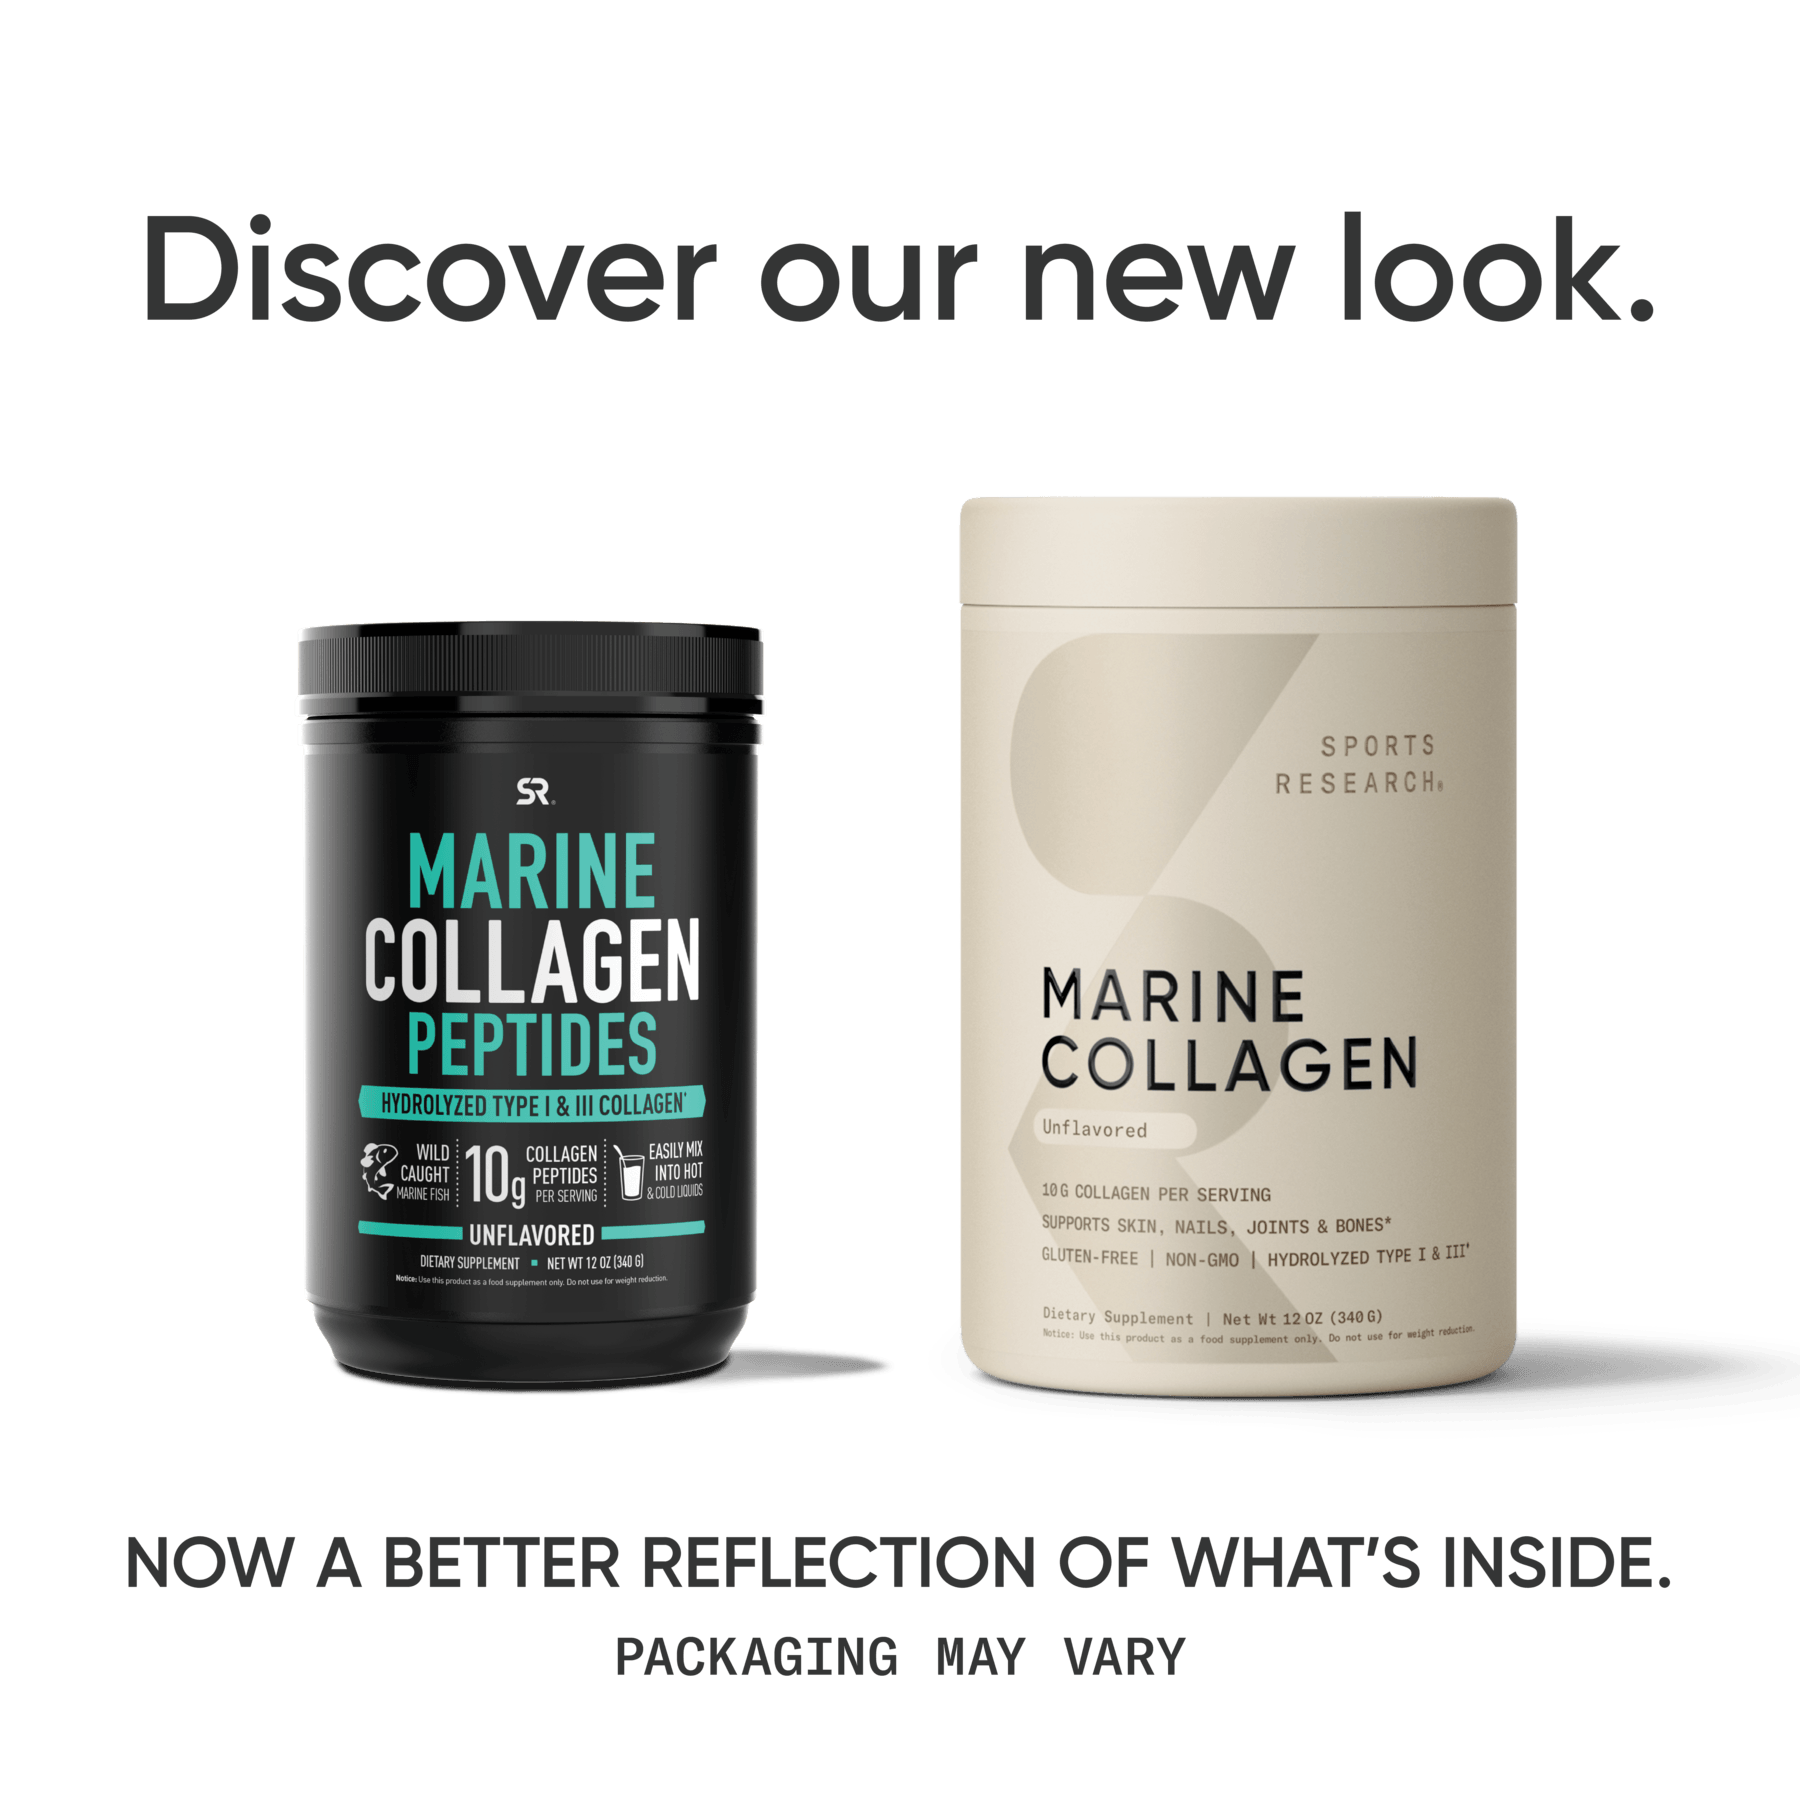 Marine Collagen Peptides - now better reflection of what's inside.